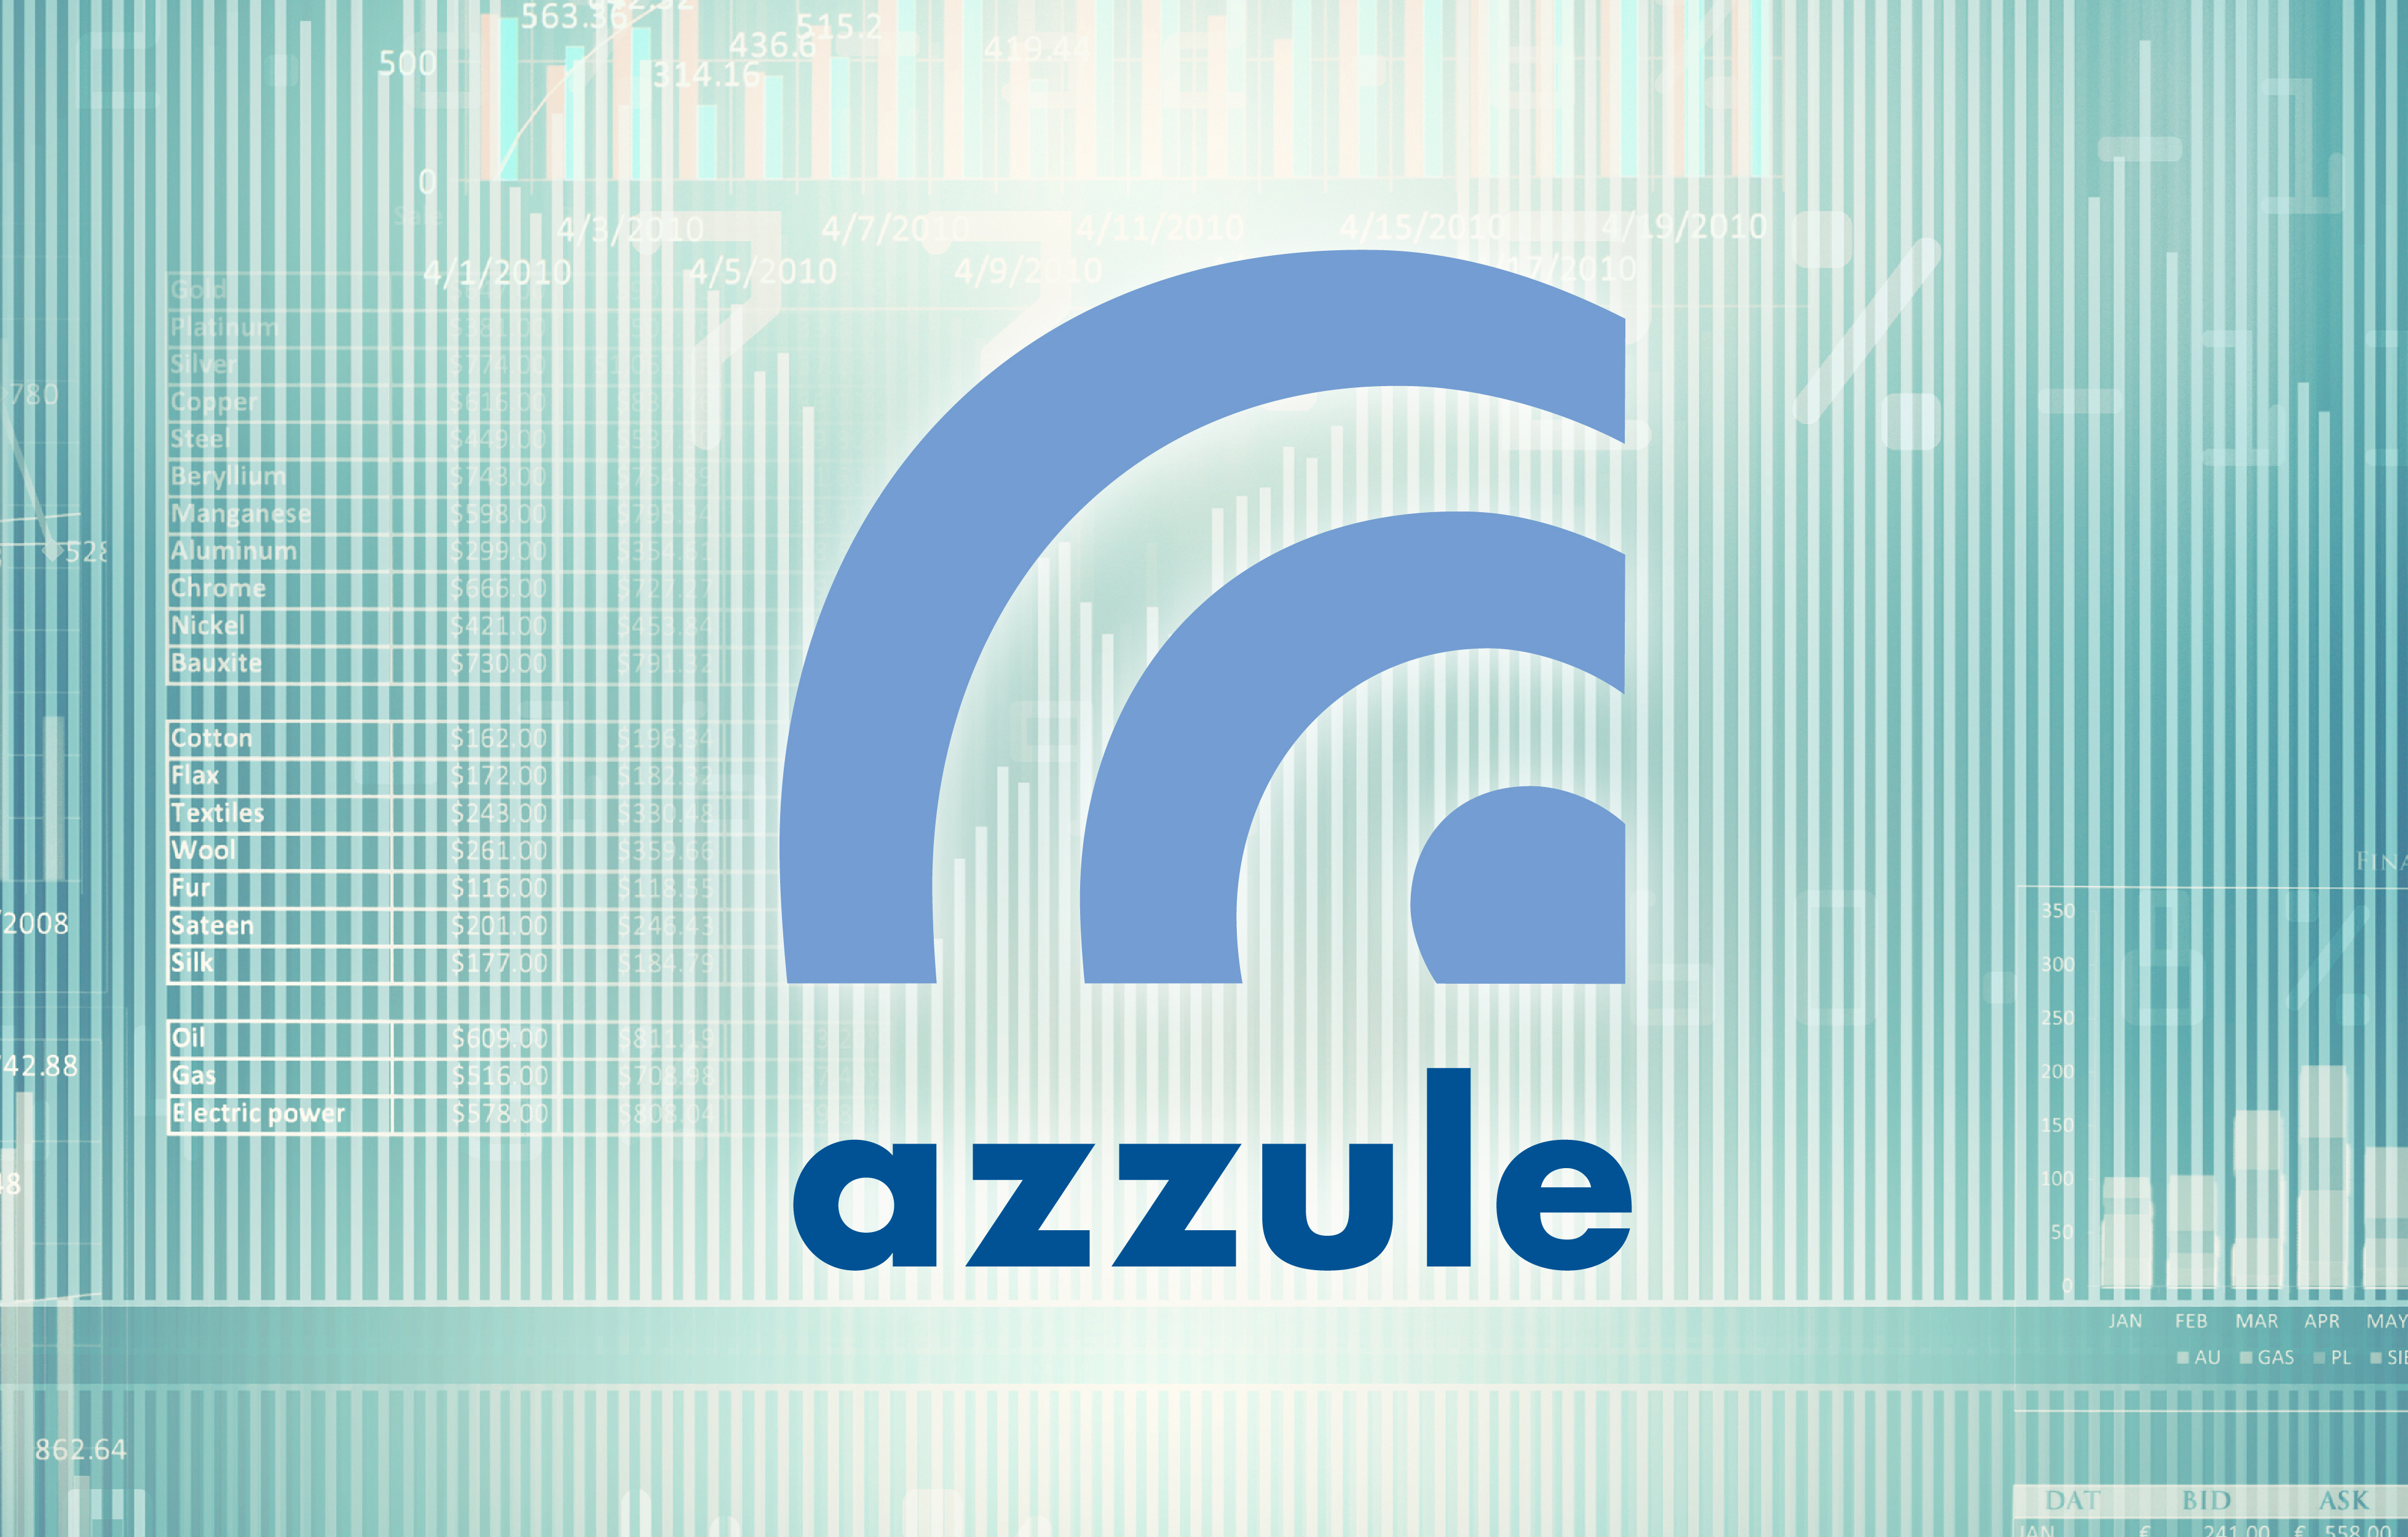 Azzule Systems, Blue Azzule Graphbic and Azzule Logo Type with Technology Background Graphics